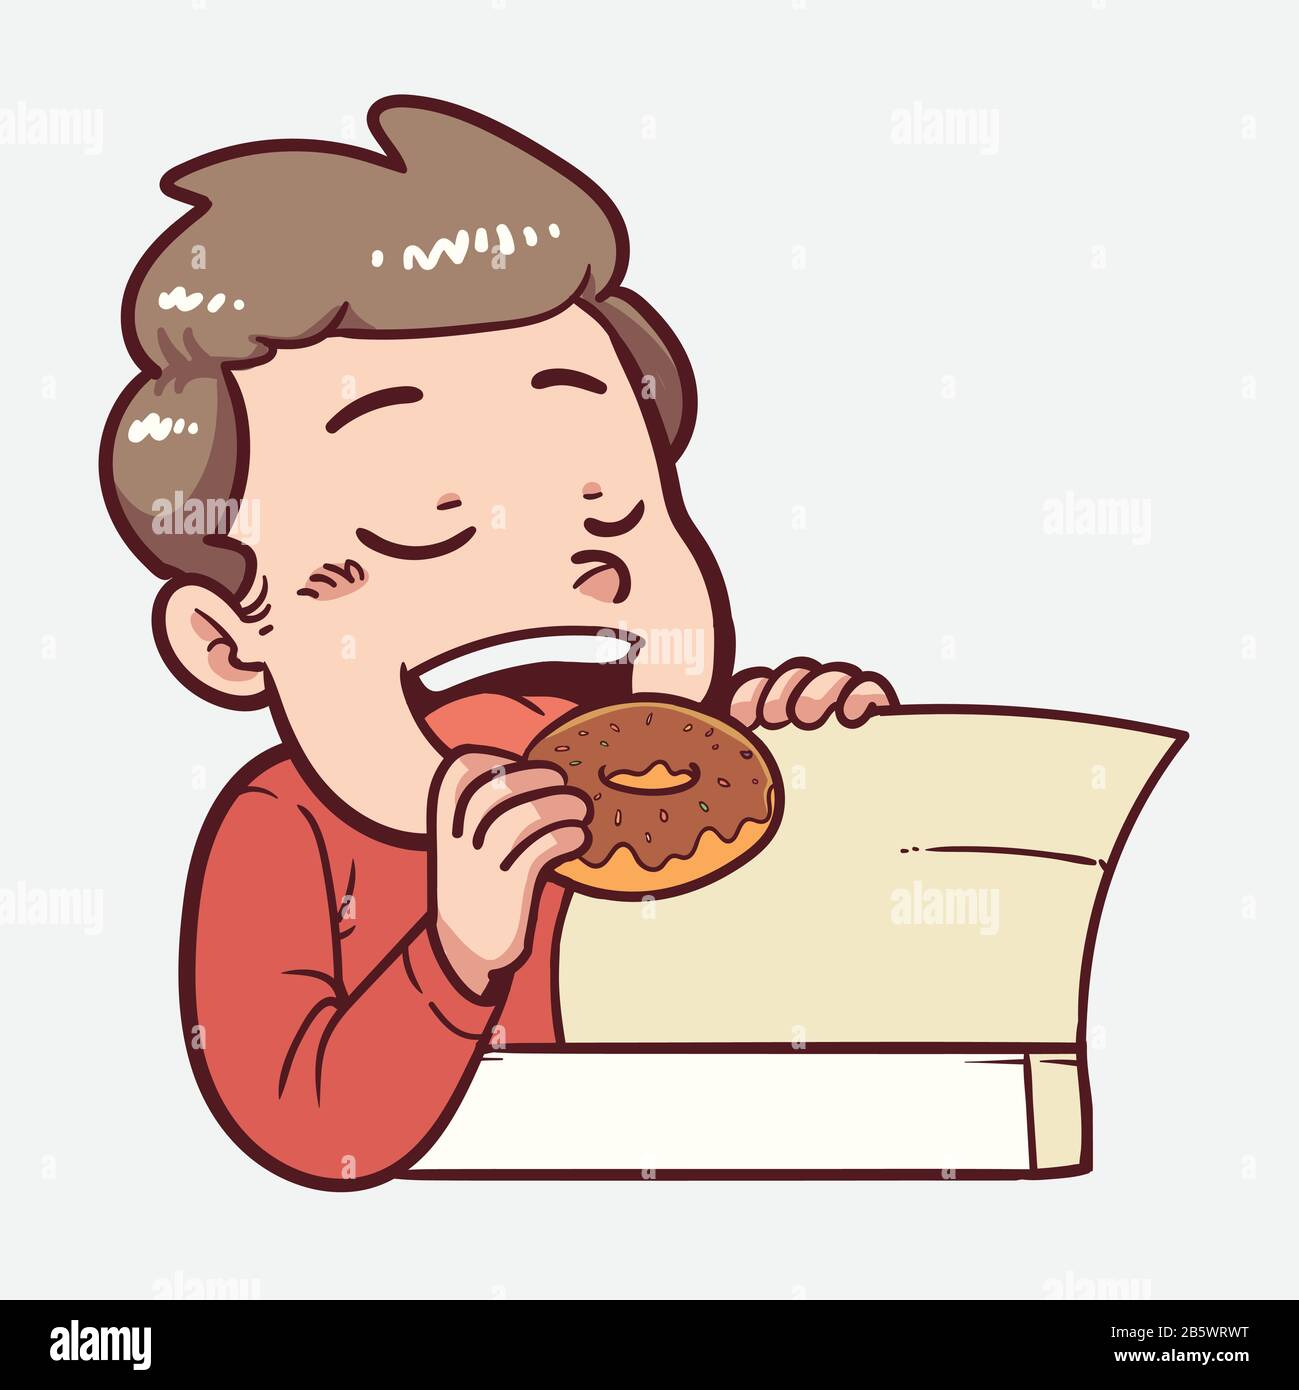 man eating donut from a box Stock Vector